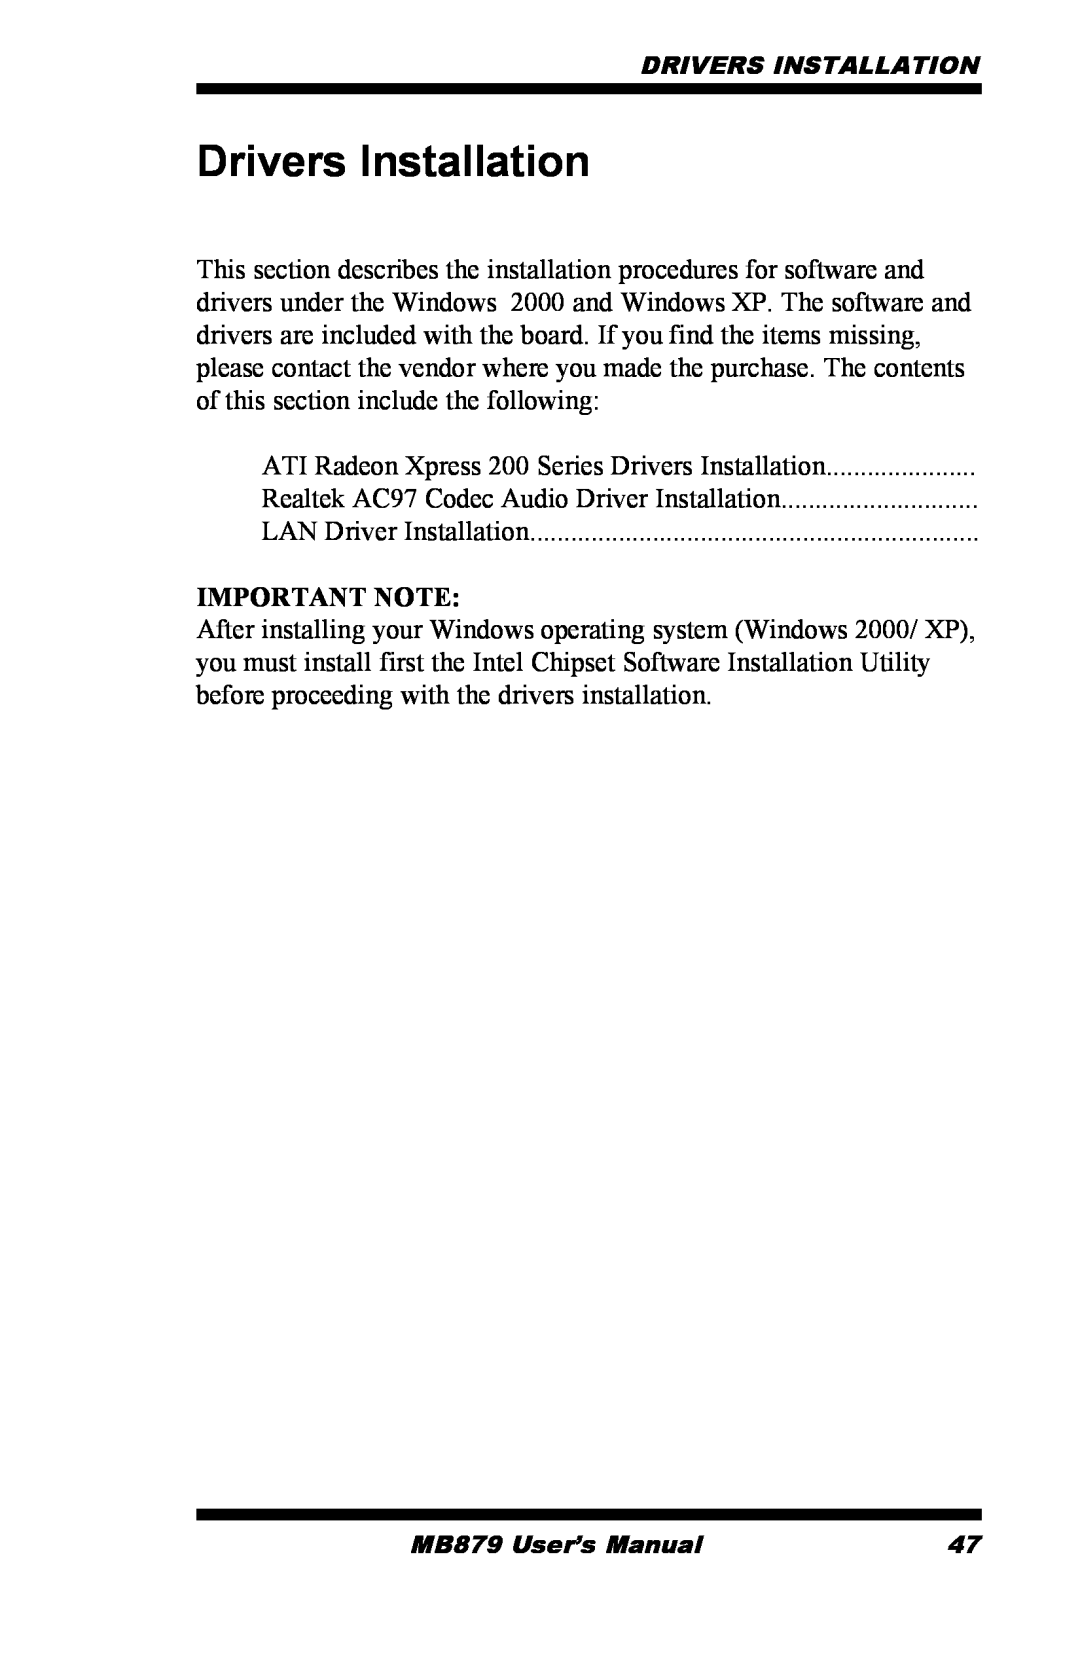 Intel MB879 user manual Drivers Installation, Important Note 